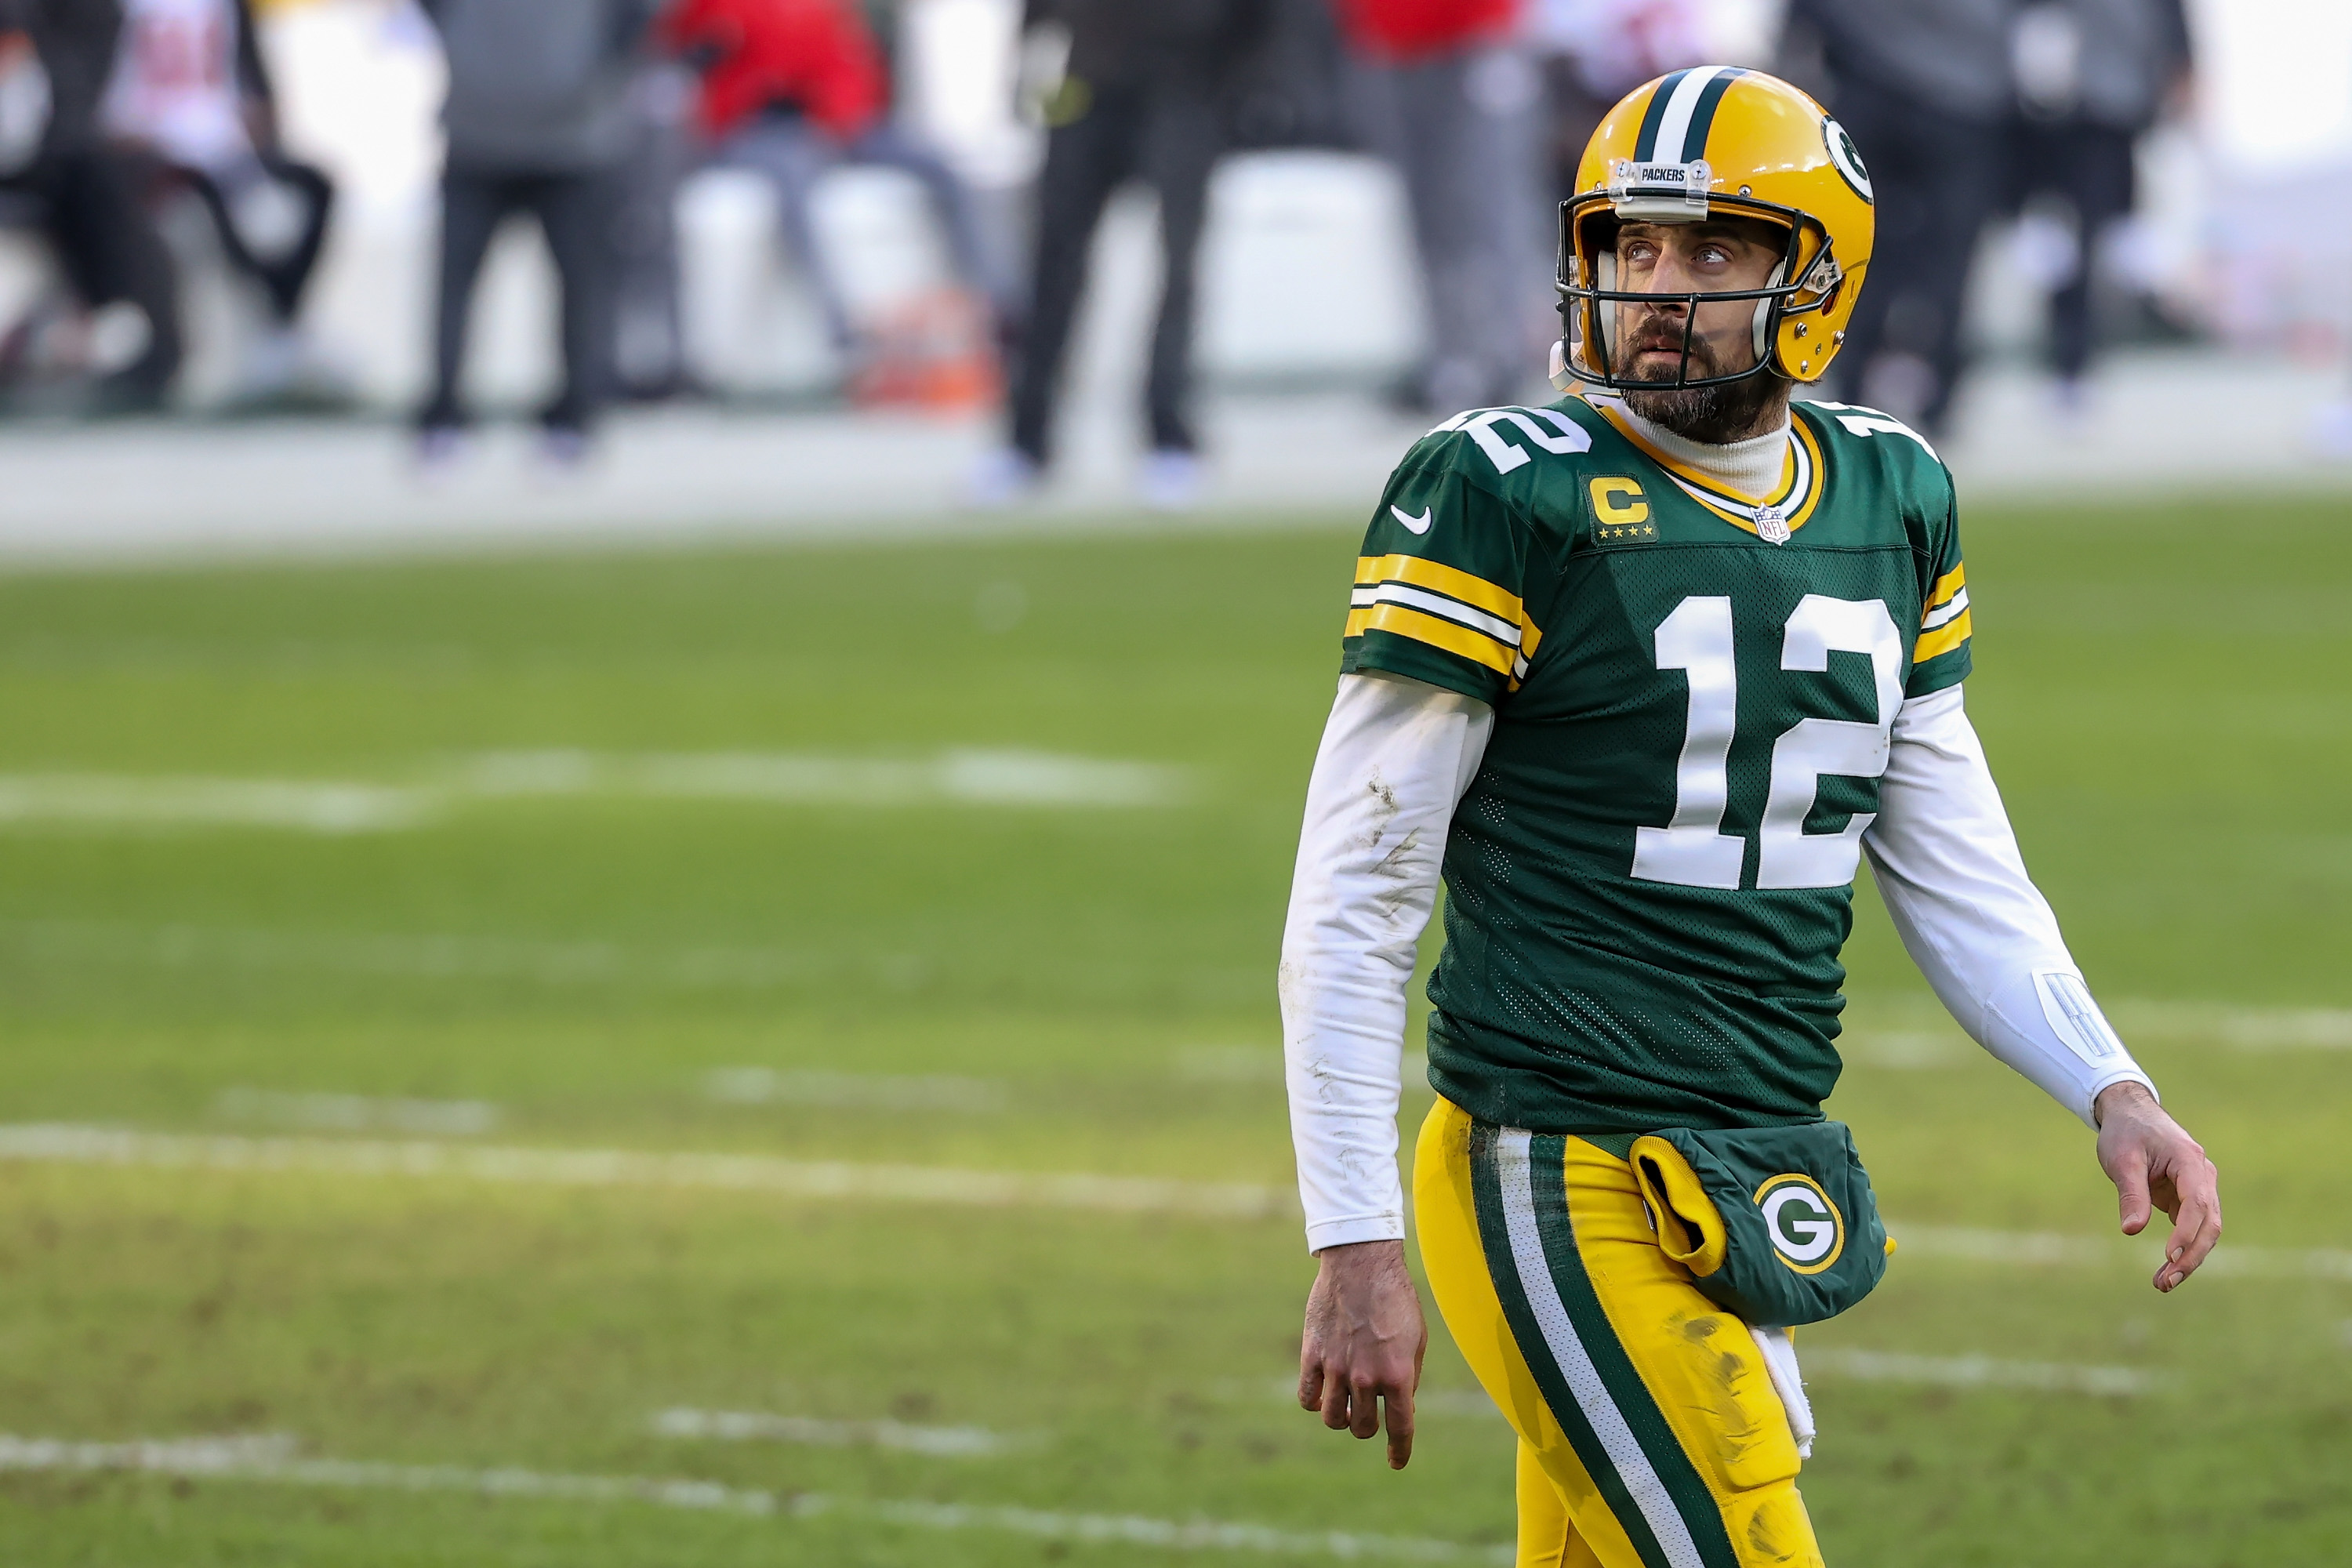 Aaron Rodgers of the Green Bay Packers walks across the field in the second quarter against the Tampa Bay Buccaneers during the NFC Championship game at Lambeau Field on January 24, 2021 in Green Bay, Wisconsin.